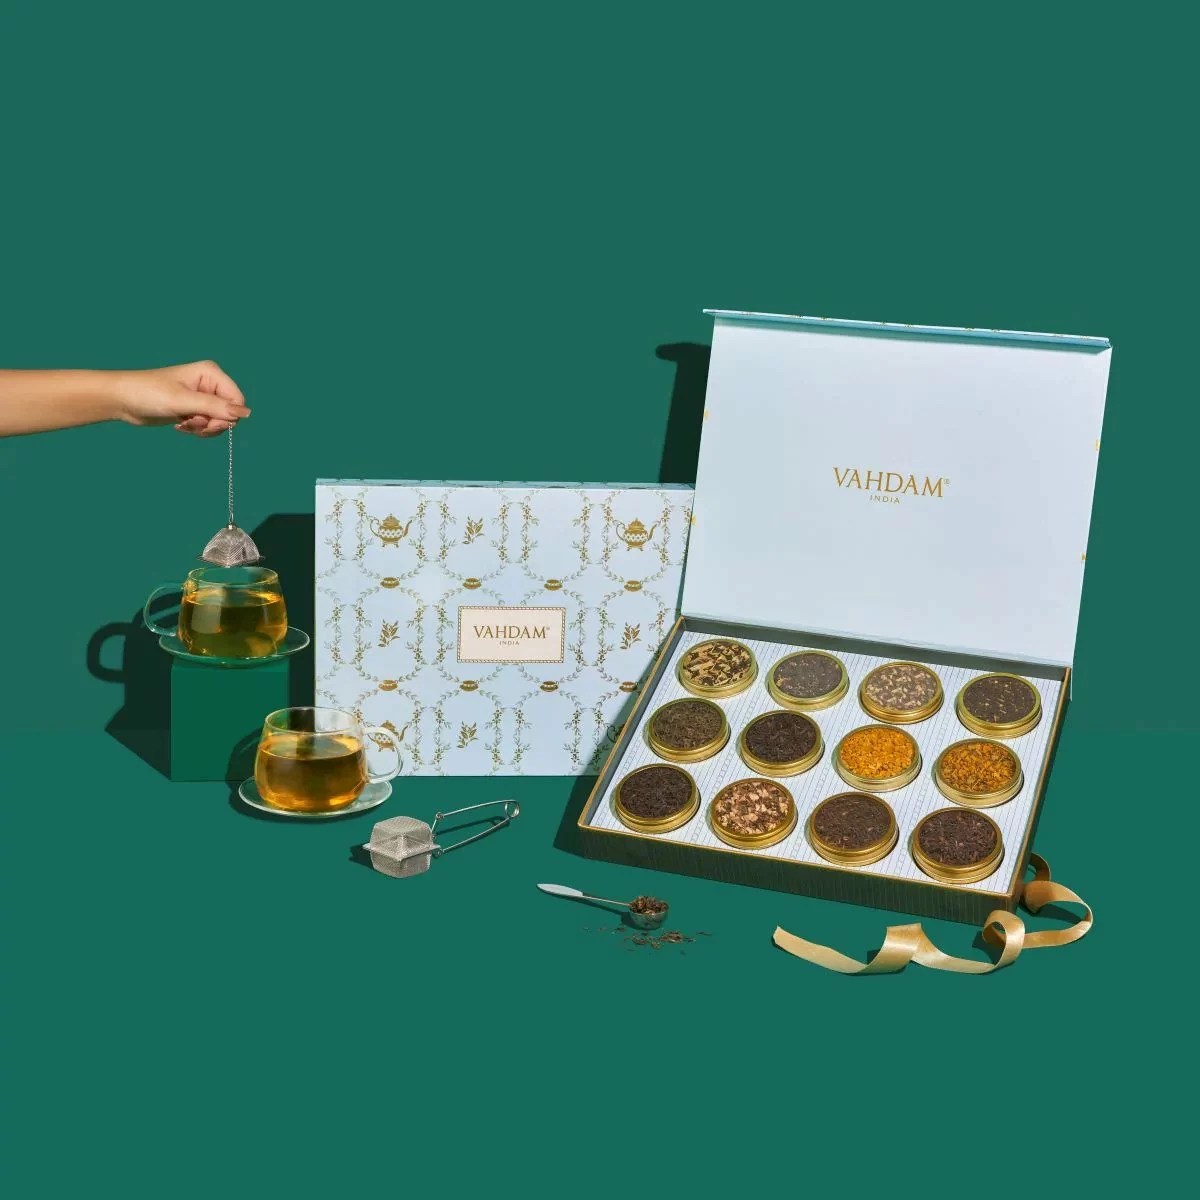 Tea Gift Set for Tea Lovers, Includes Double Insulated Tea Cup 12 Uniquely  Blended Teas